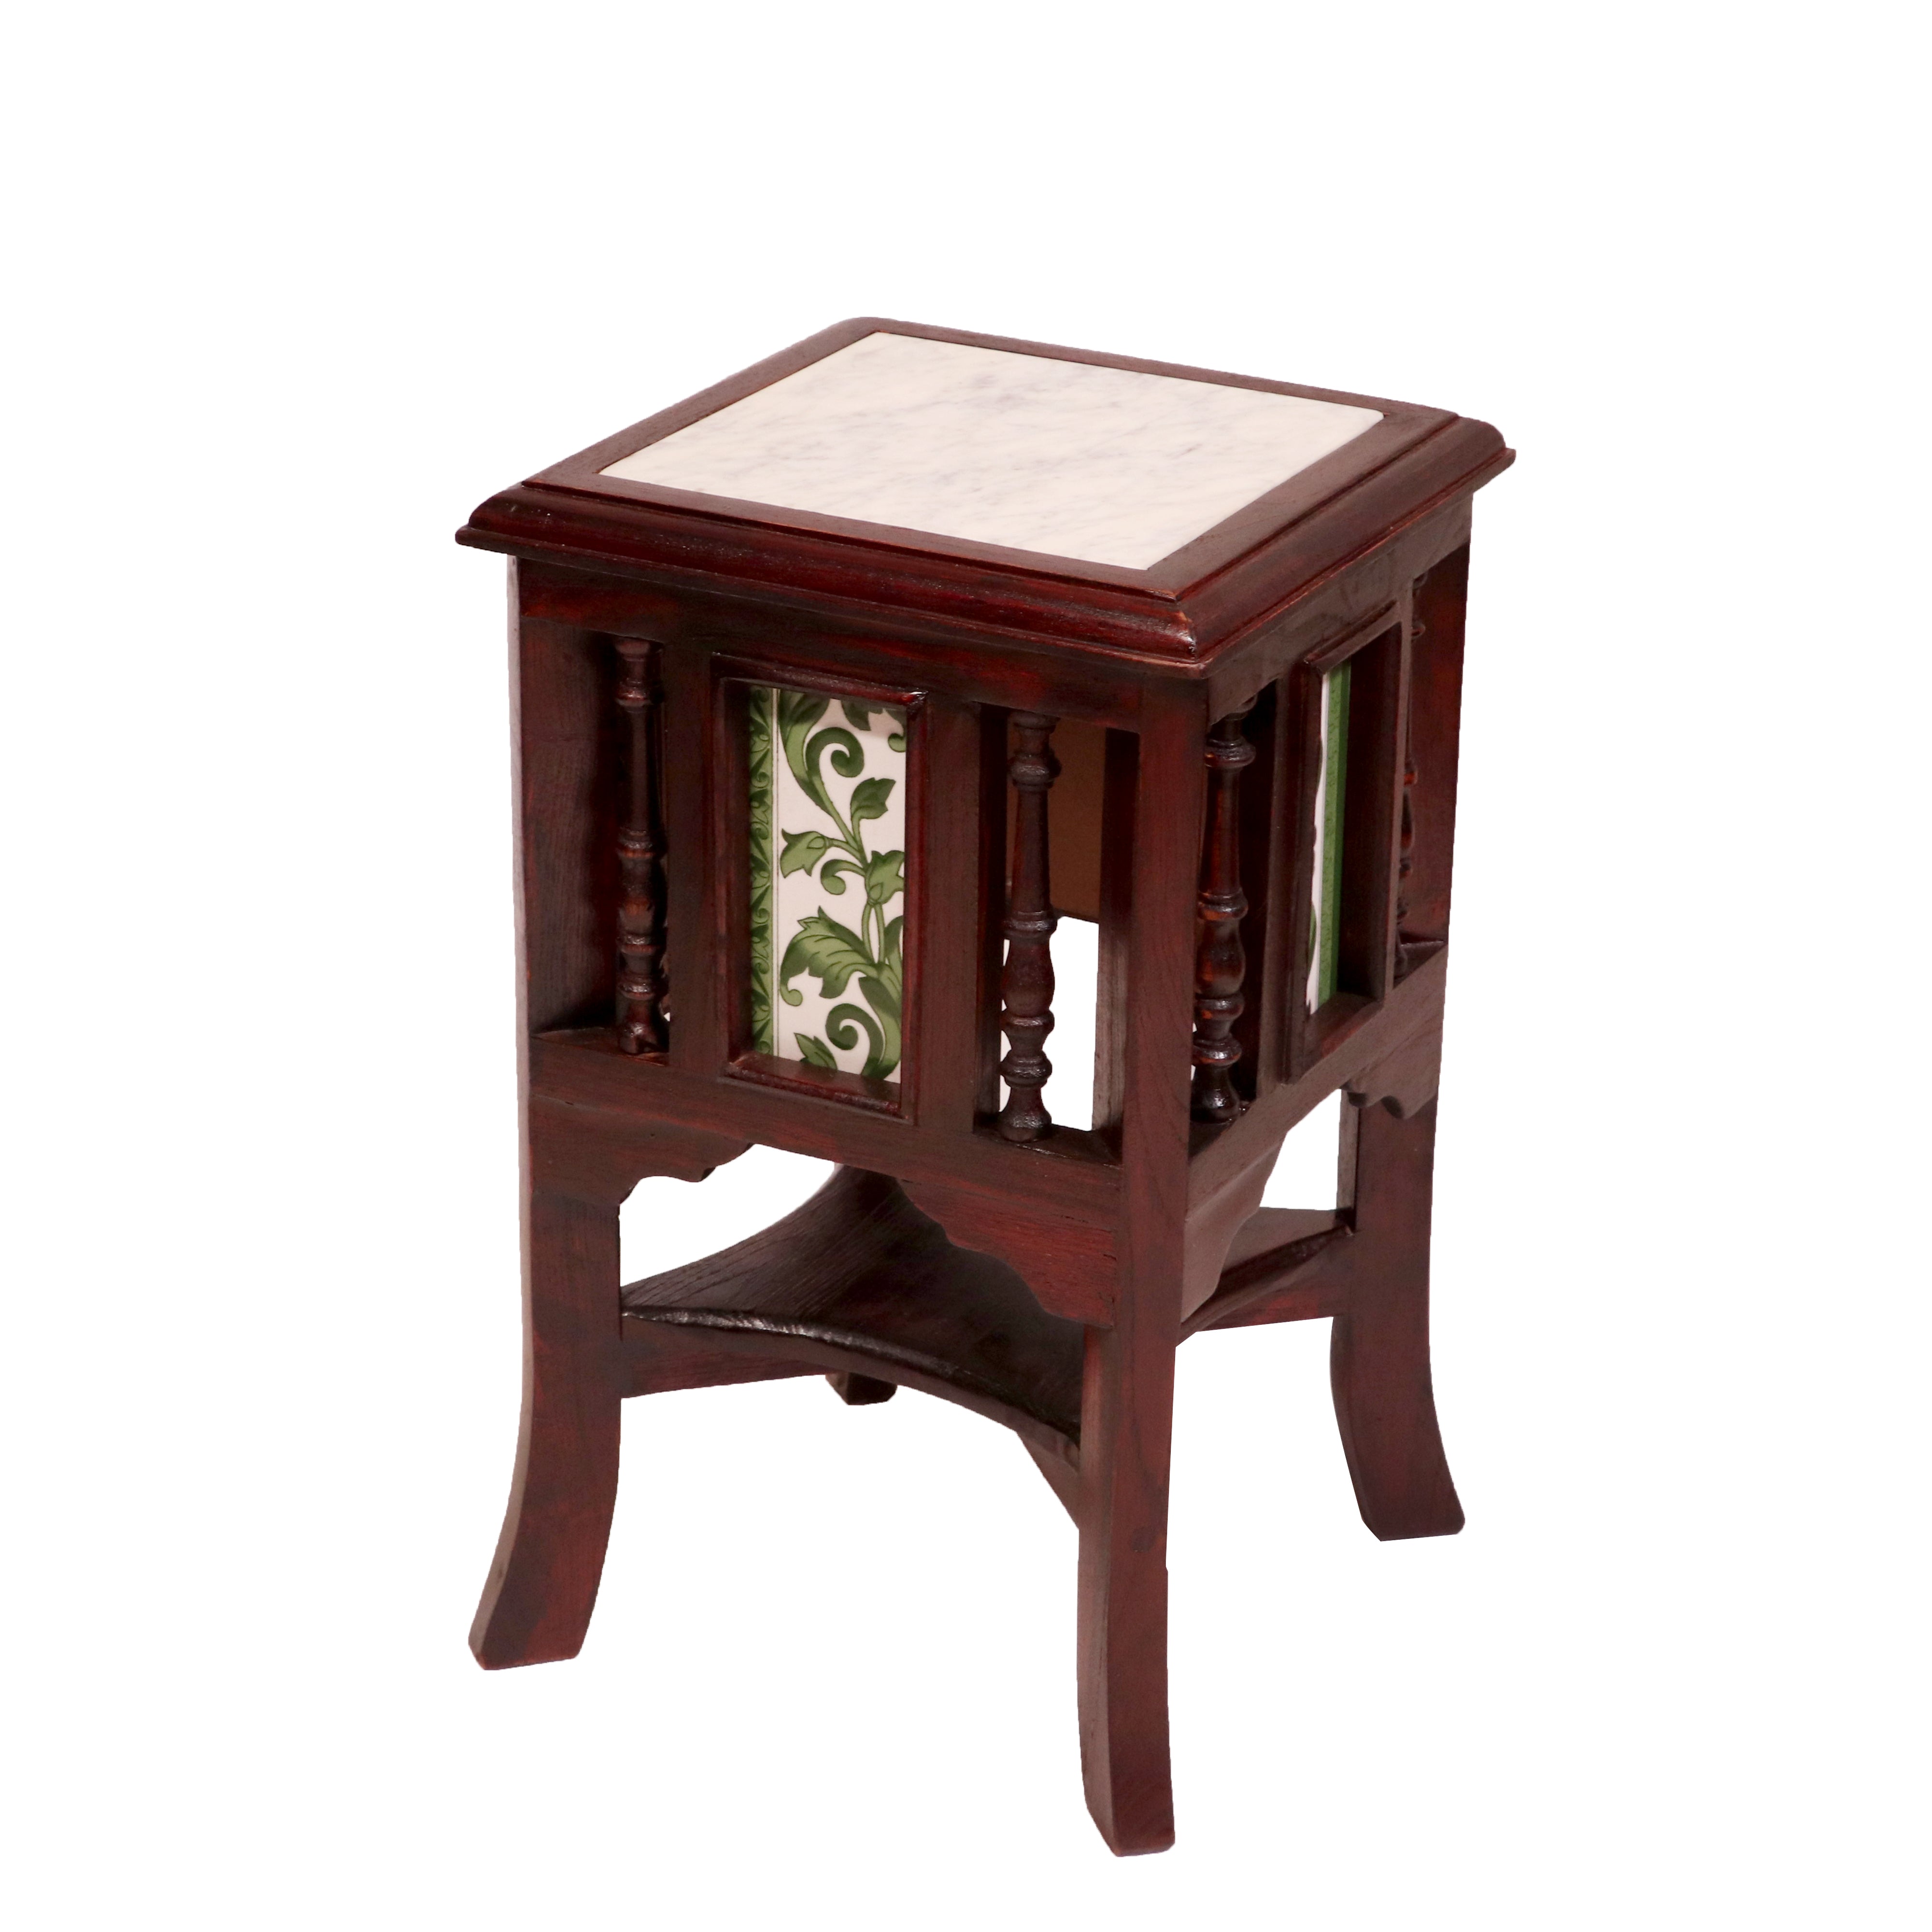 Teak ceramic tile end table with marble top 11 x 11 x 18 Inch End Table